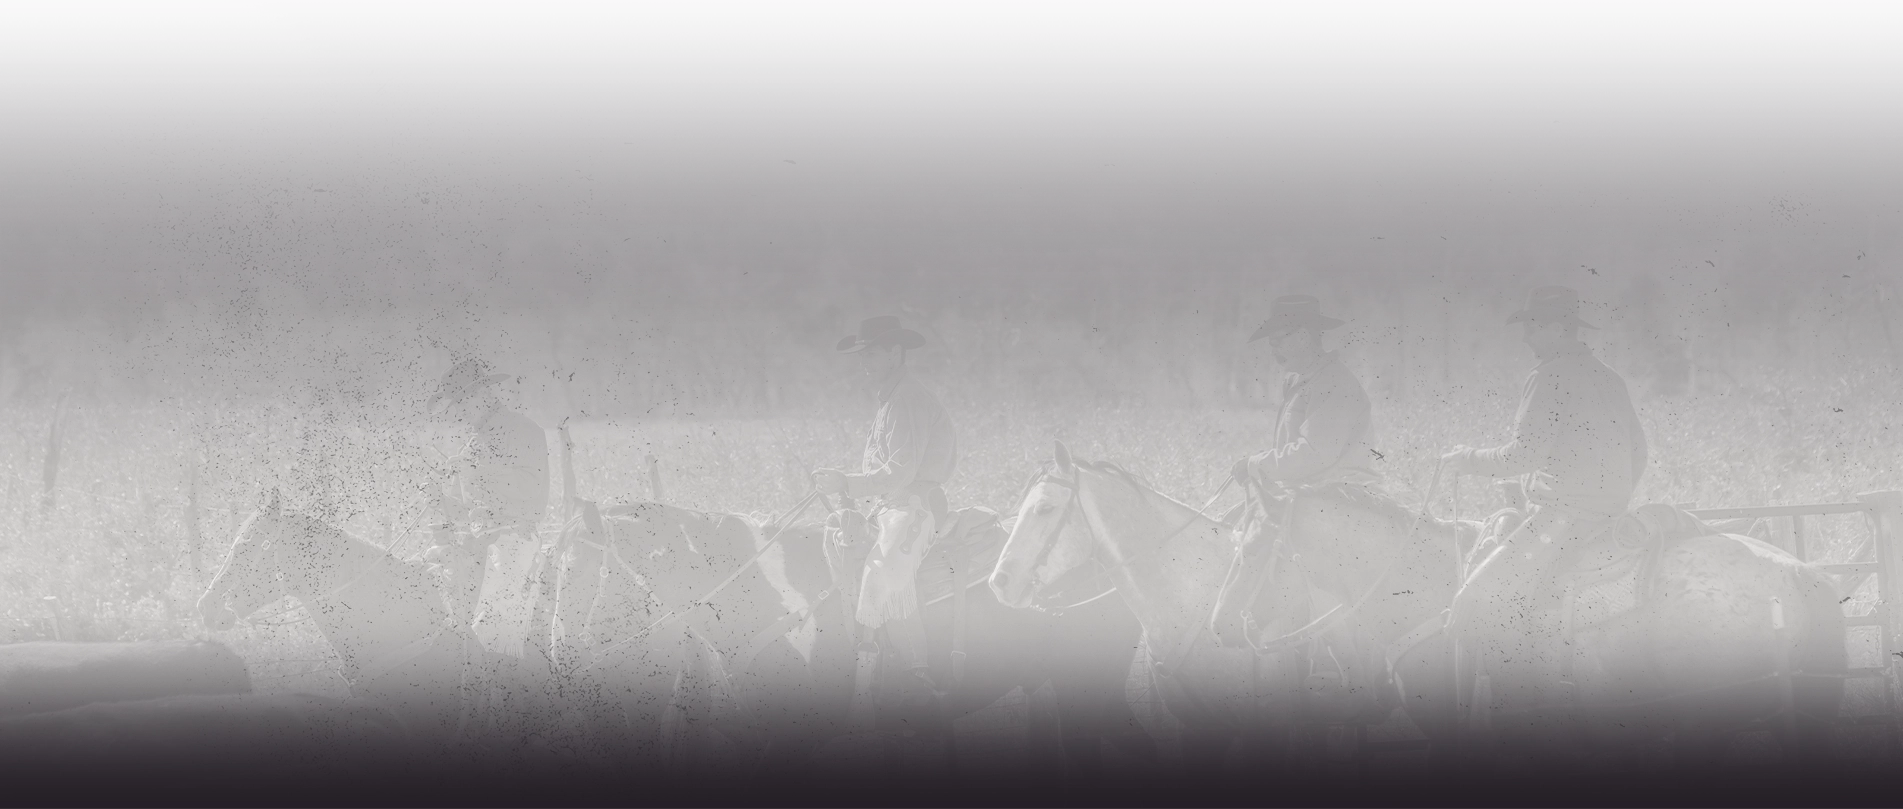 Four cowboys on horseback riding in a field going left. The image has a weathered overlay and fades to purple on the bottom.